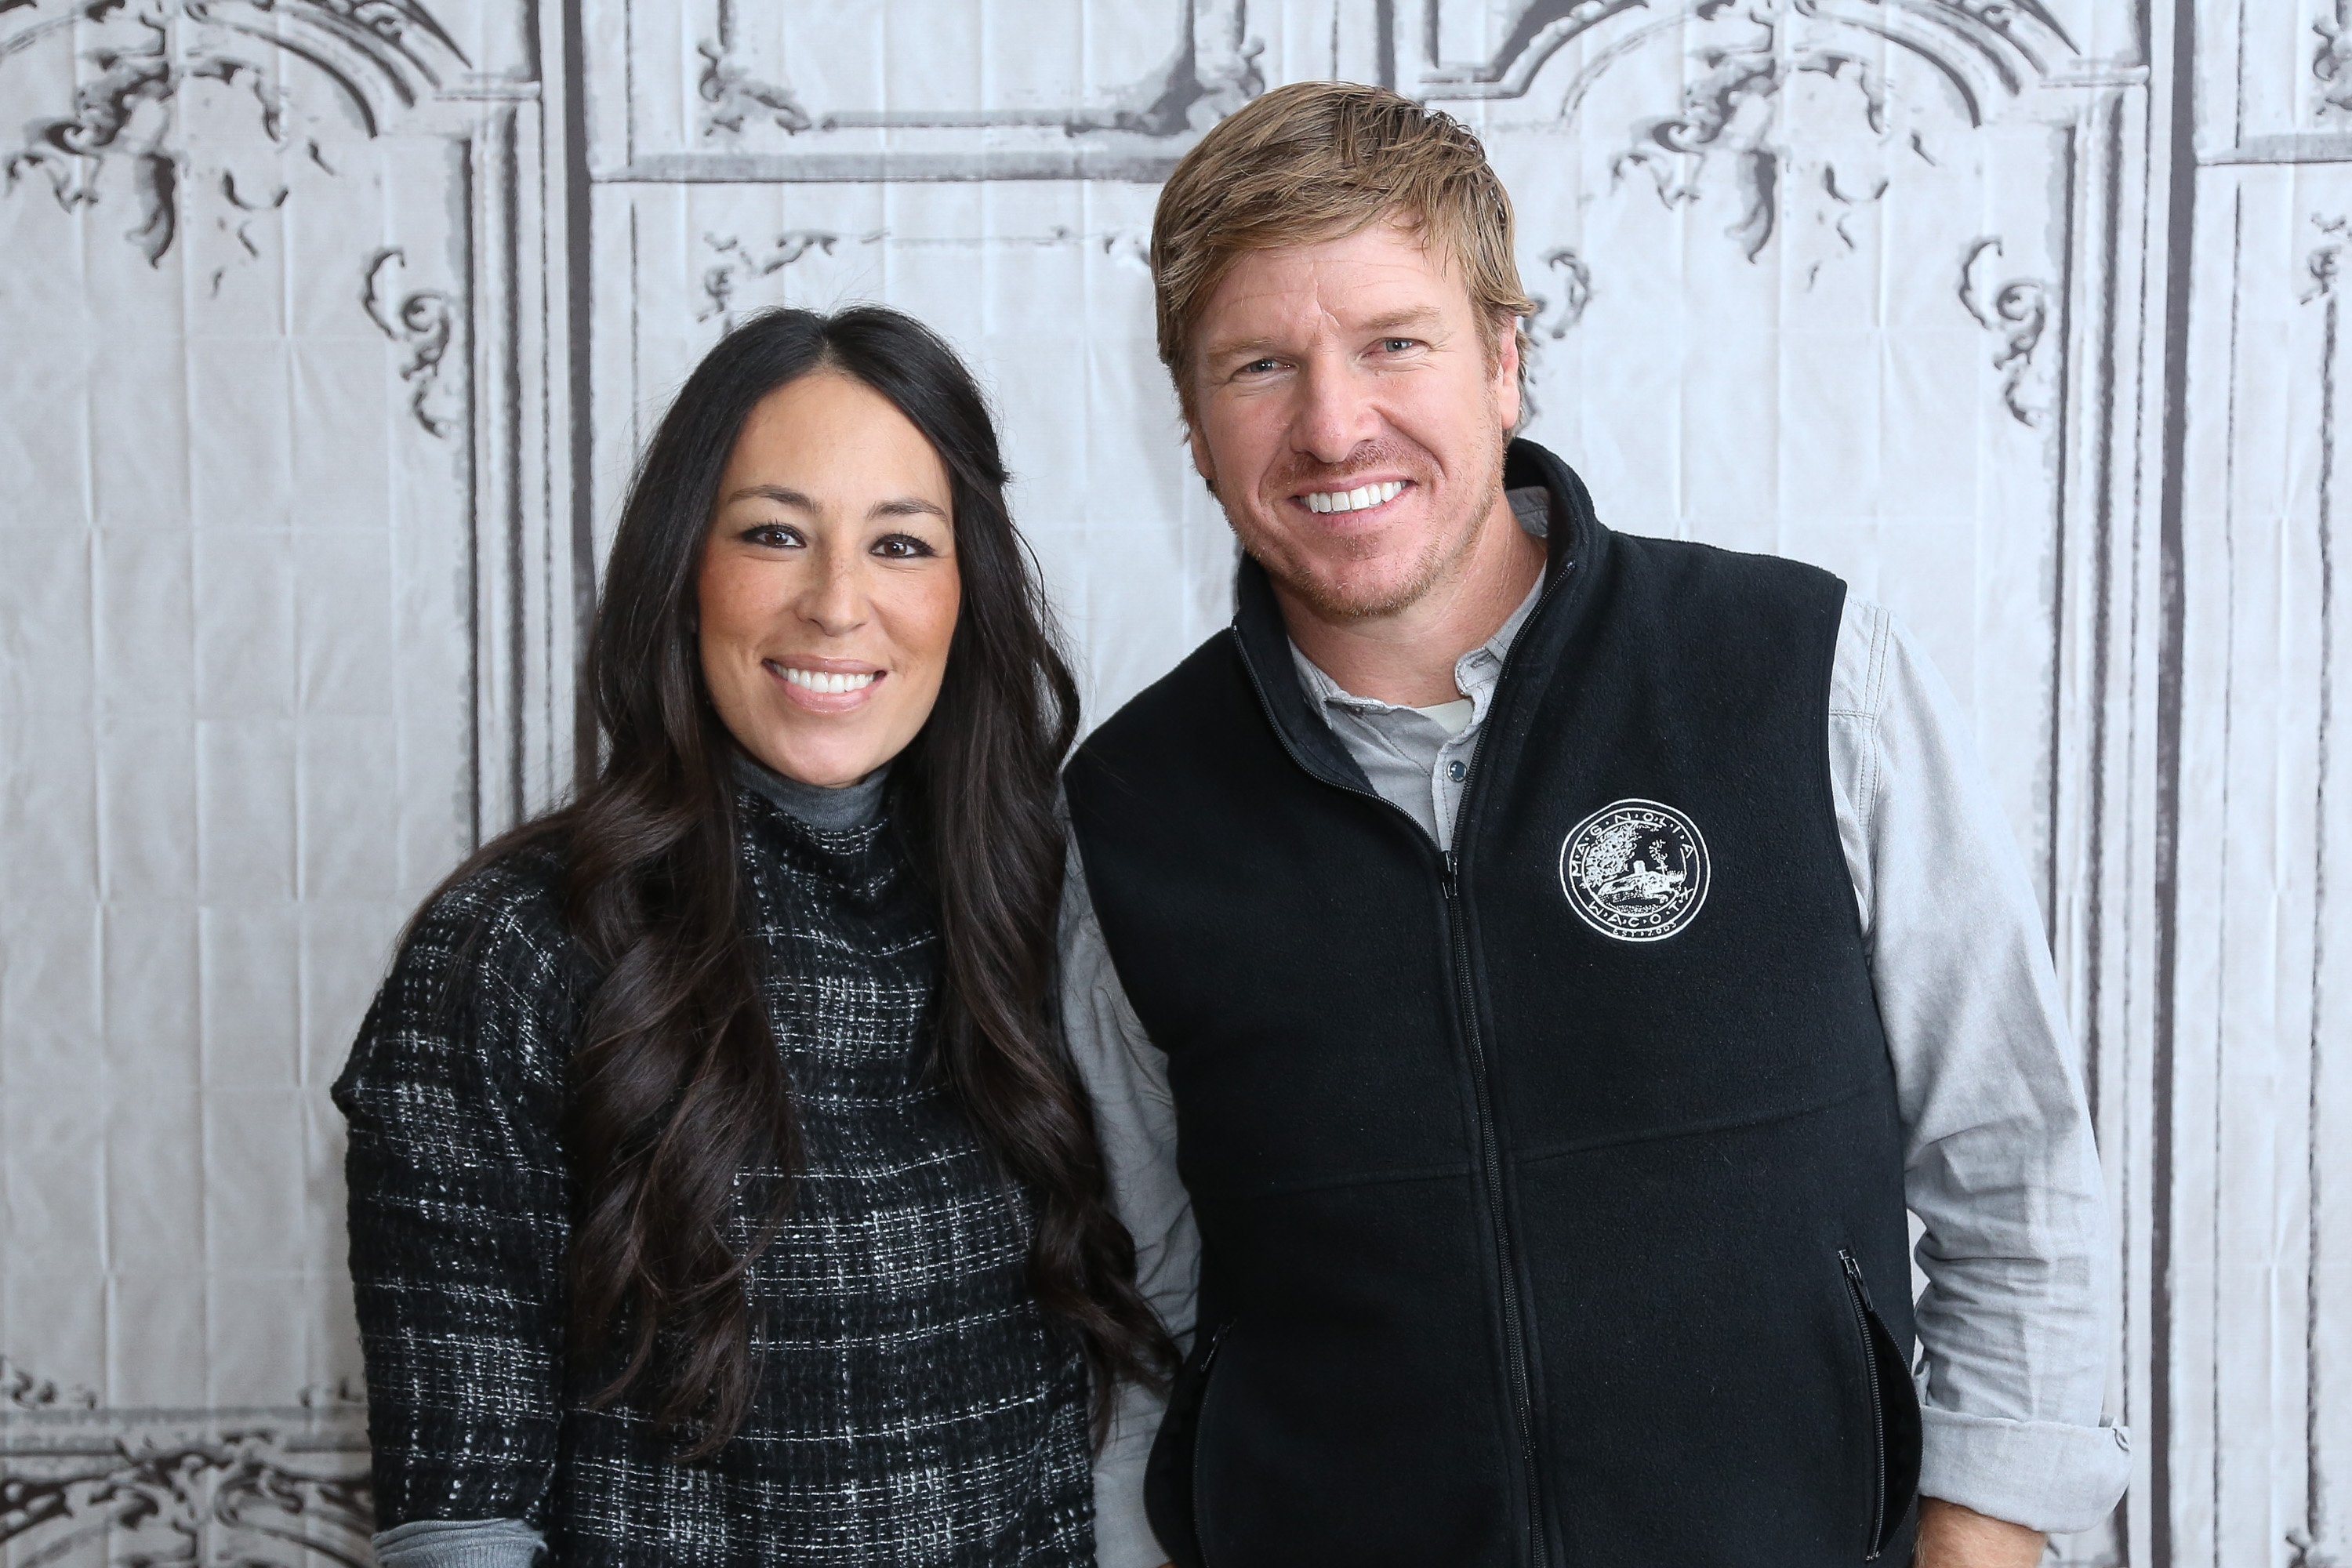 Chip Gaines and Joanna Gaines at AOL Build Presents: "Fixer Upper" at AOL Studios In New York on December 8, 2015. | Source:Getty Images